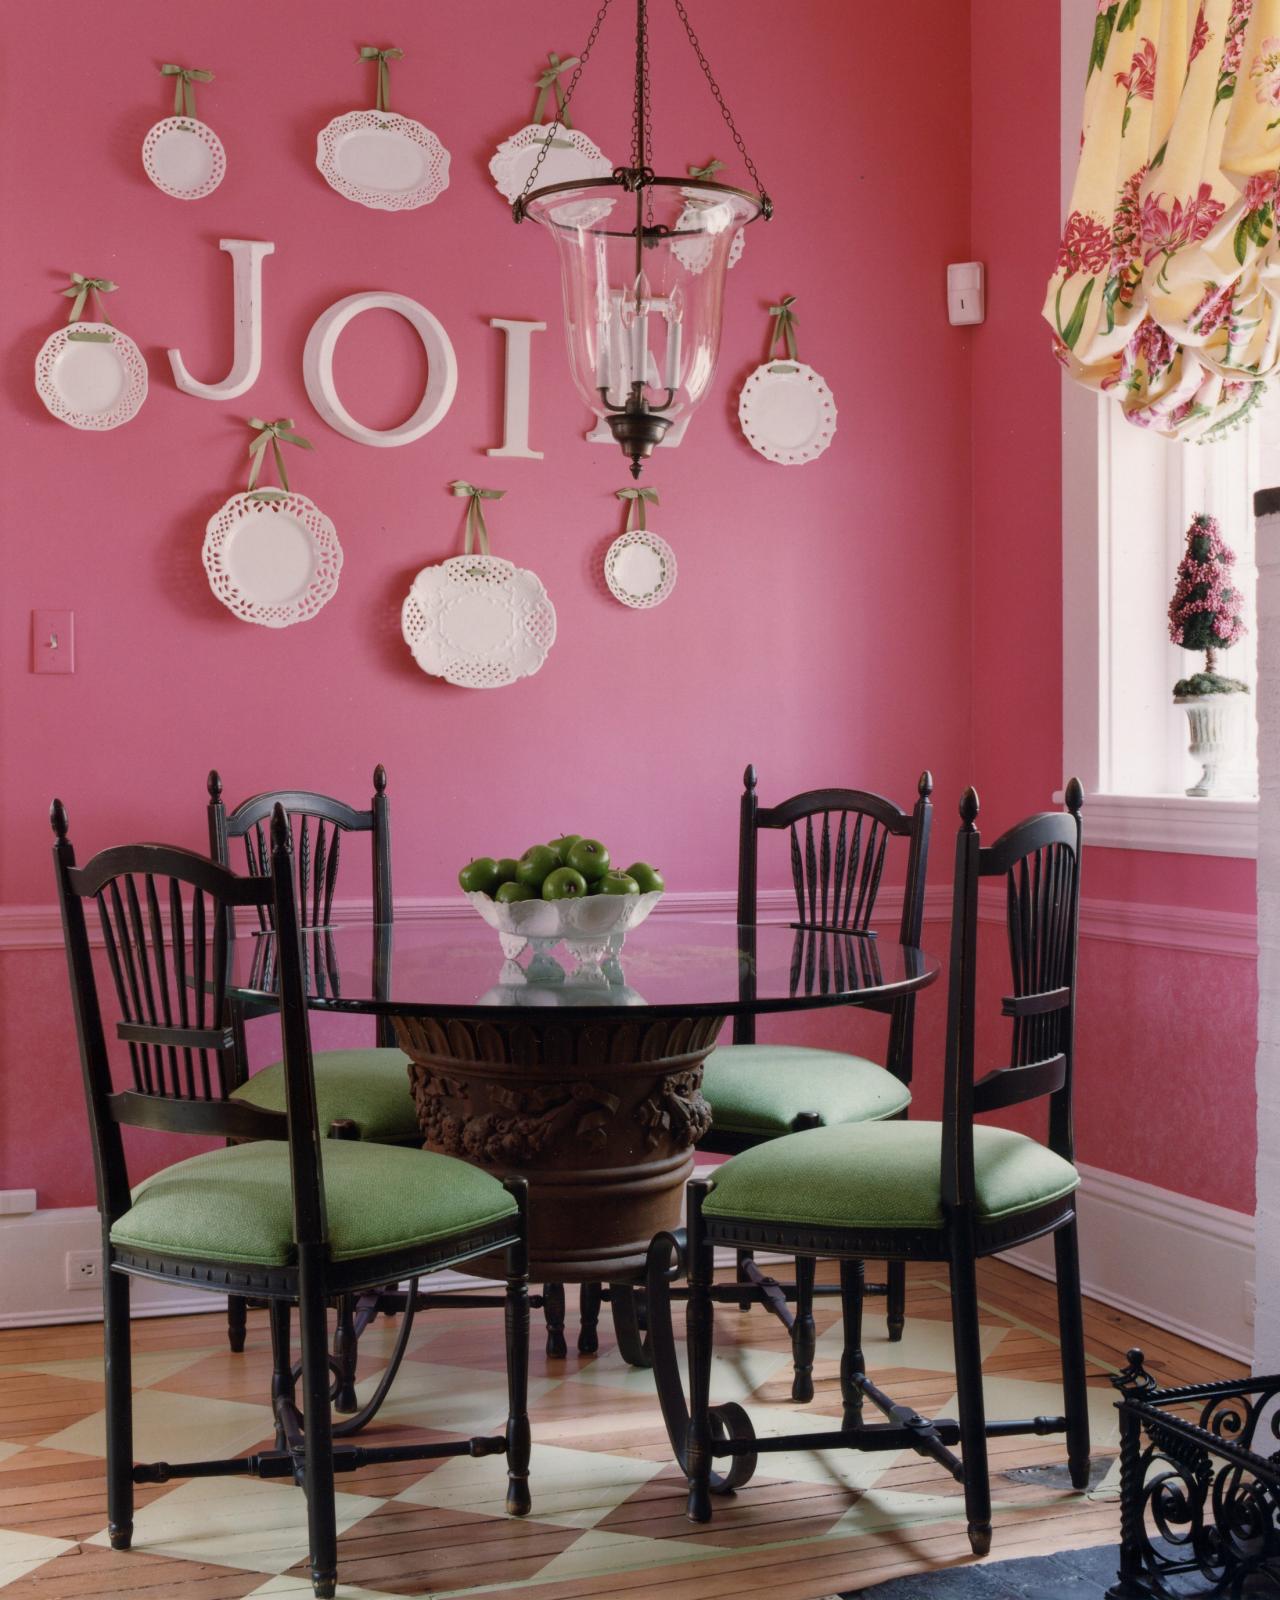 How To Choose A Color Scheme 8 Tips To Get Started DIY